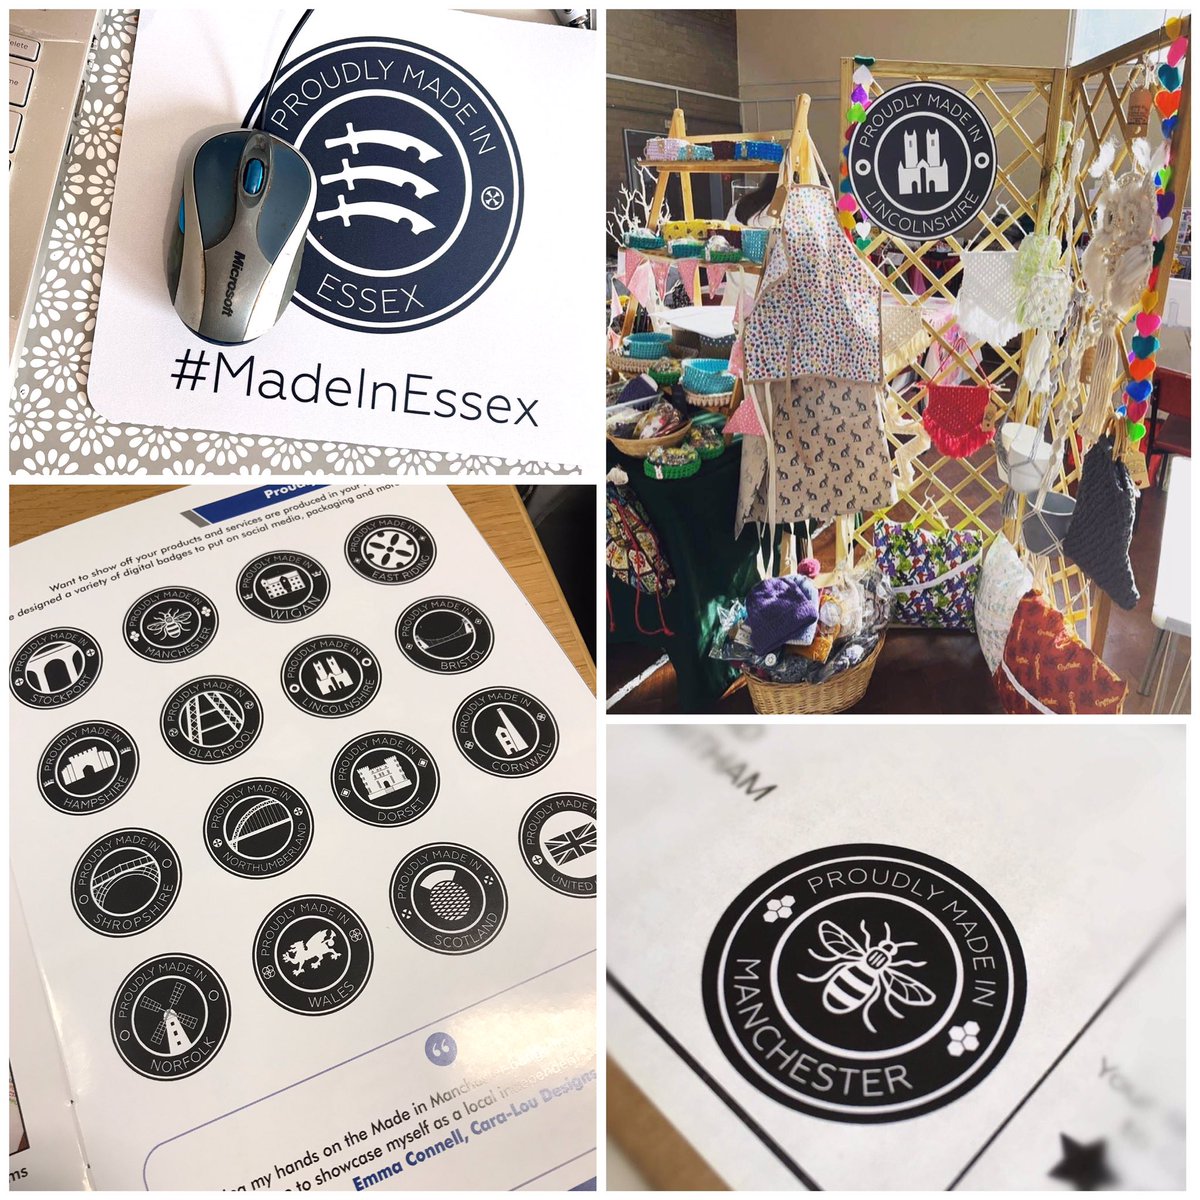 Want to show off that you’re a #crafter, #maker, #artisan in your region? Take a look at aquadesigngroup.co.uk/proudly-made-in for the #MadeIn badge design. You can purchase #marketing items, such as #stickers too 😊 #SBS #ShopIndie #BizBubble #SmartSocial #MeetTheMaker #SmallBizFridayUK